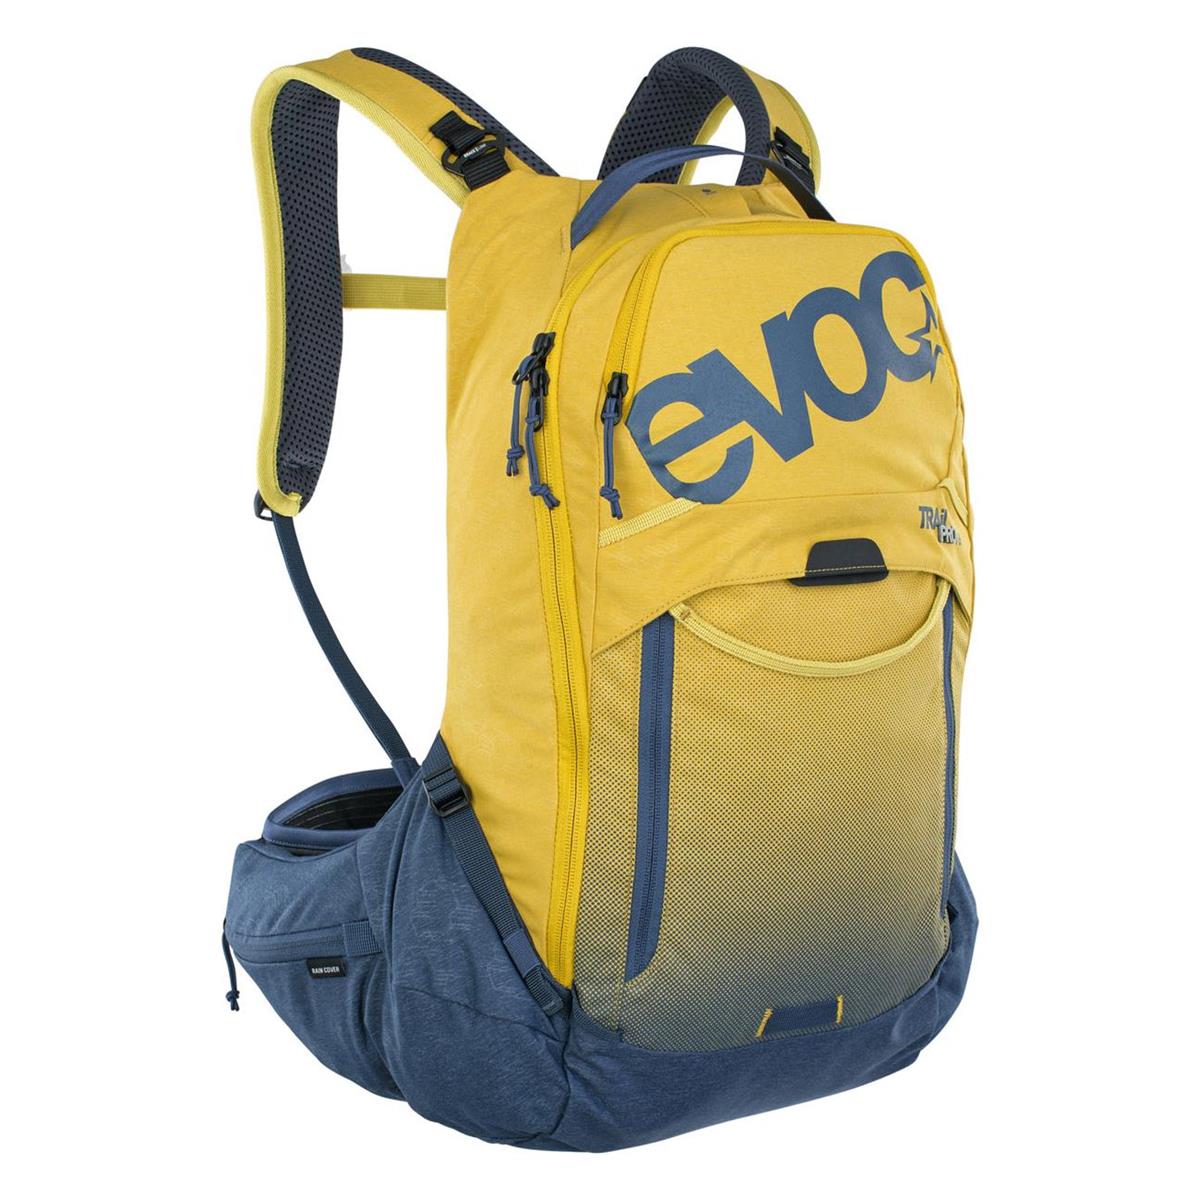 Backpack Trail Pro 16 litri Curry - Denim size S/M